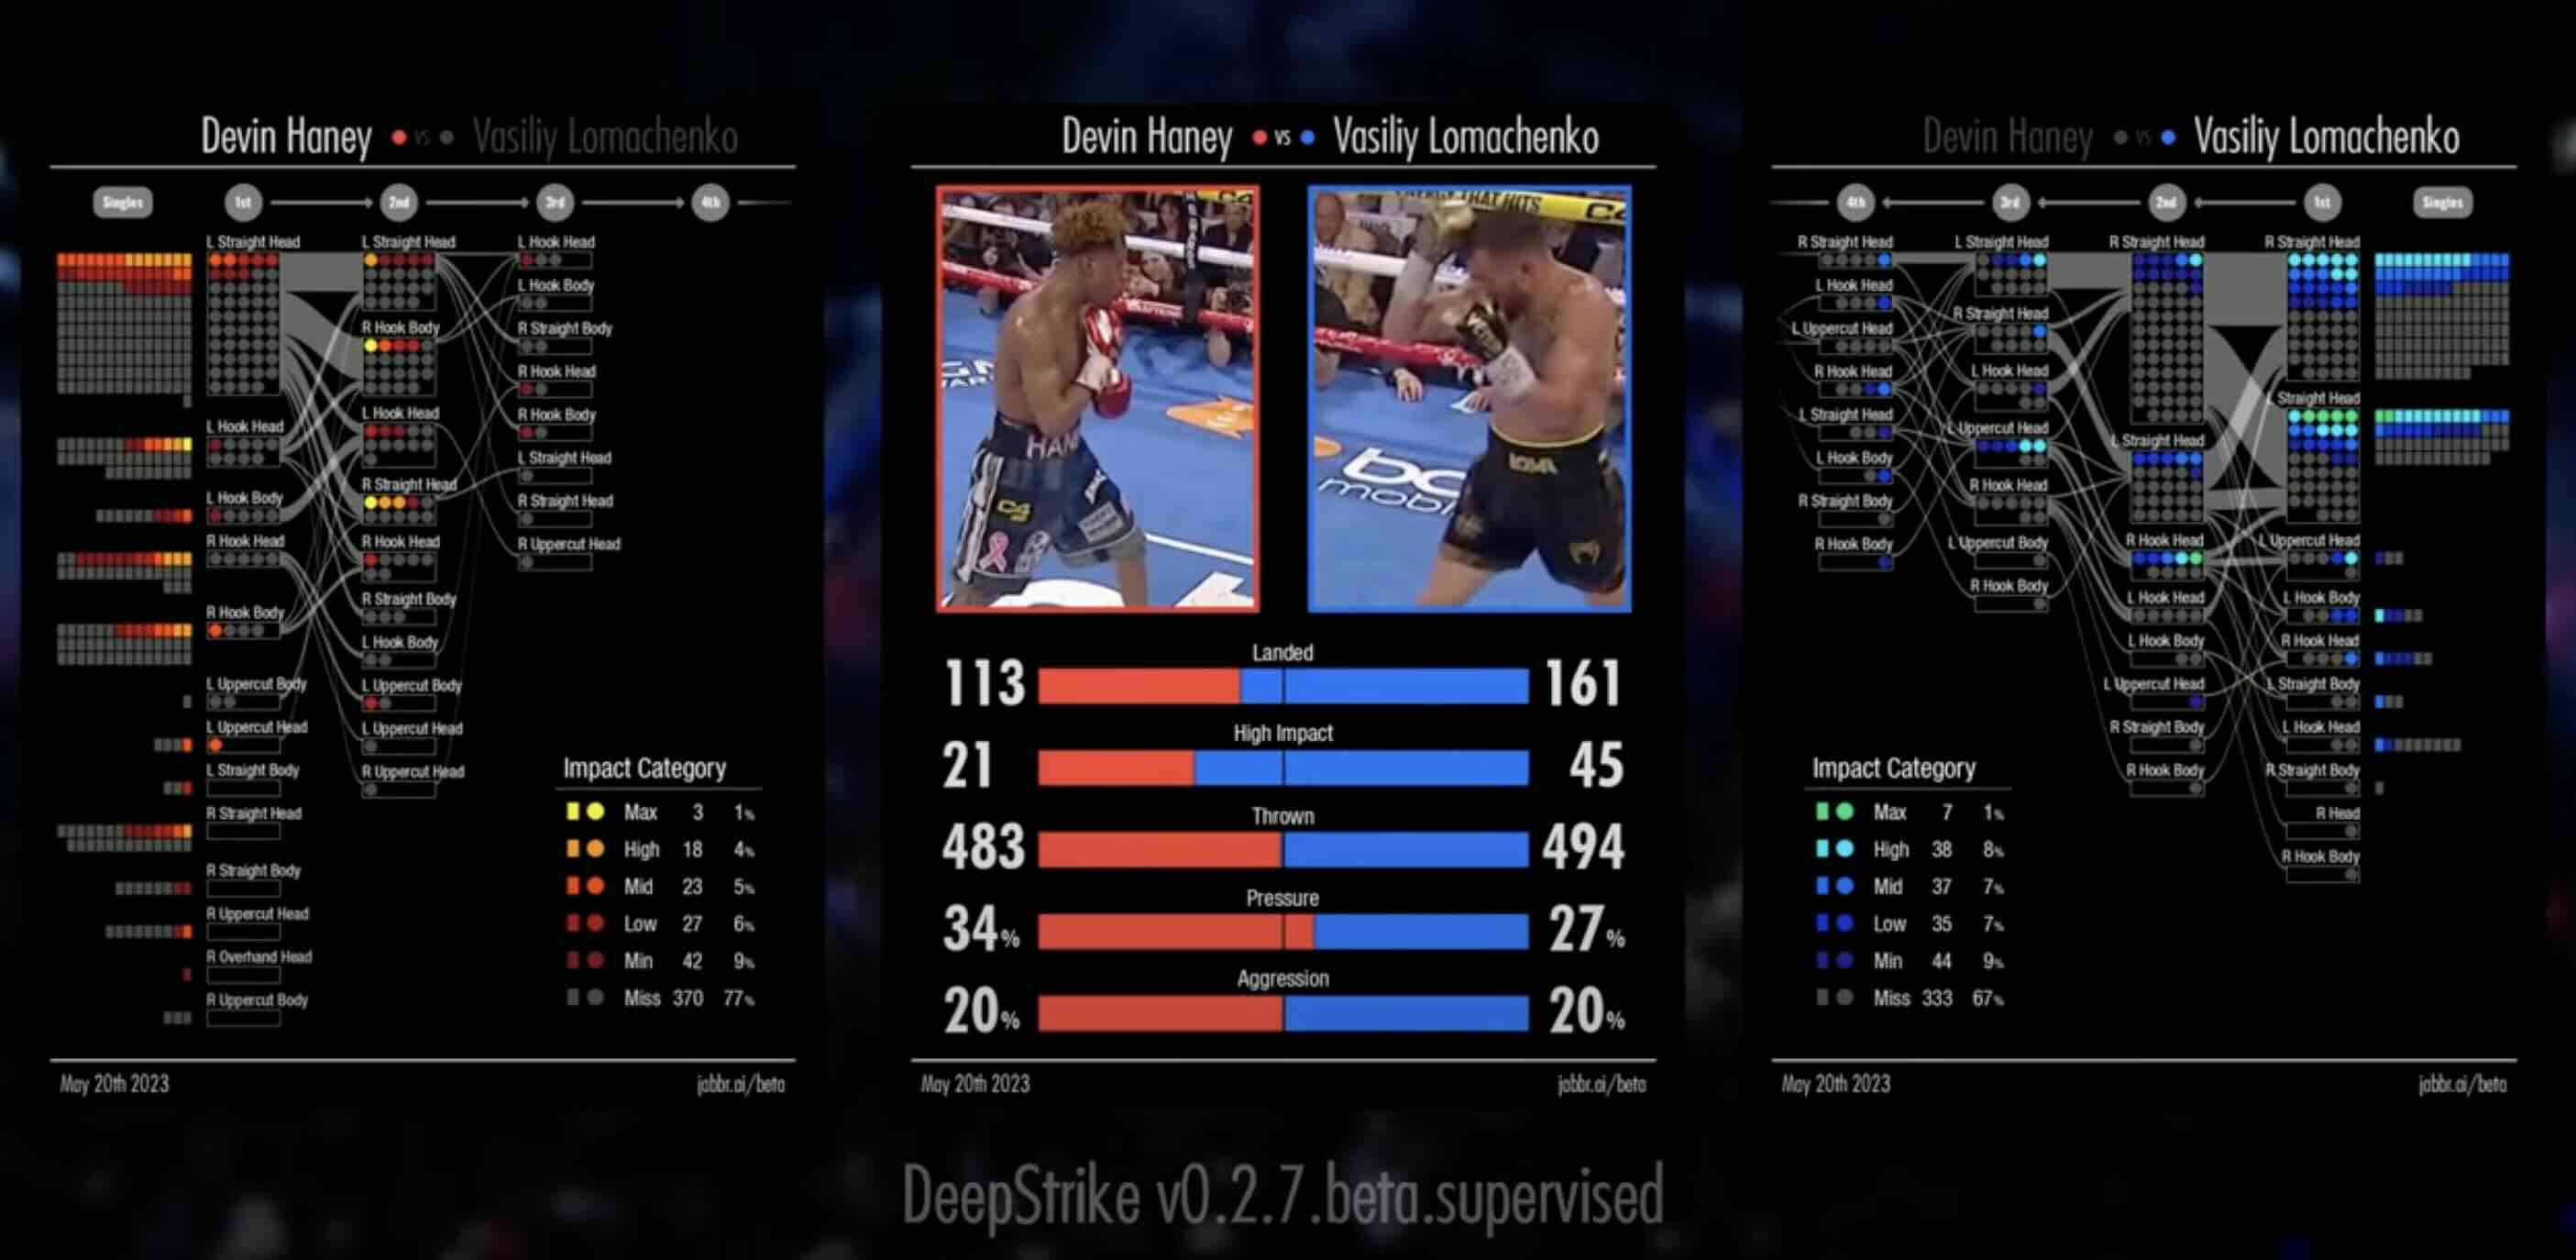 A list of Jabbr stats from the boxing match between Lomachenko and Haney